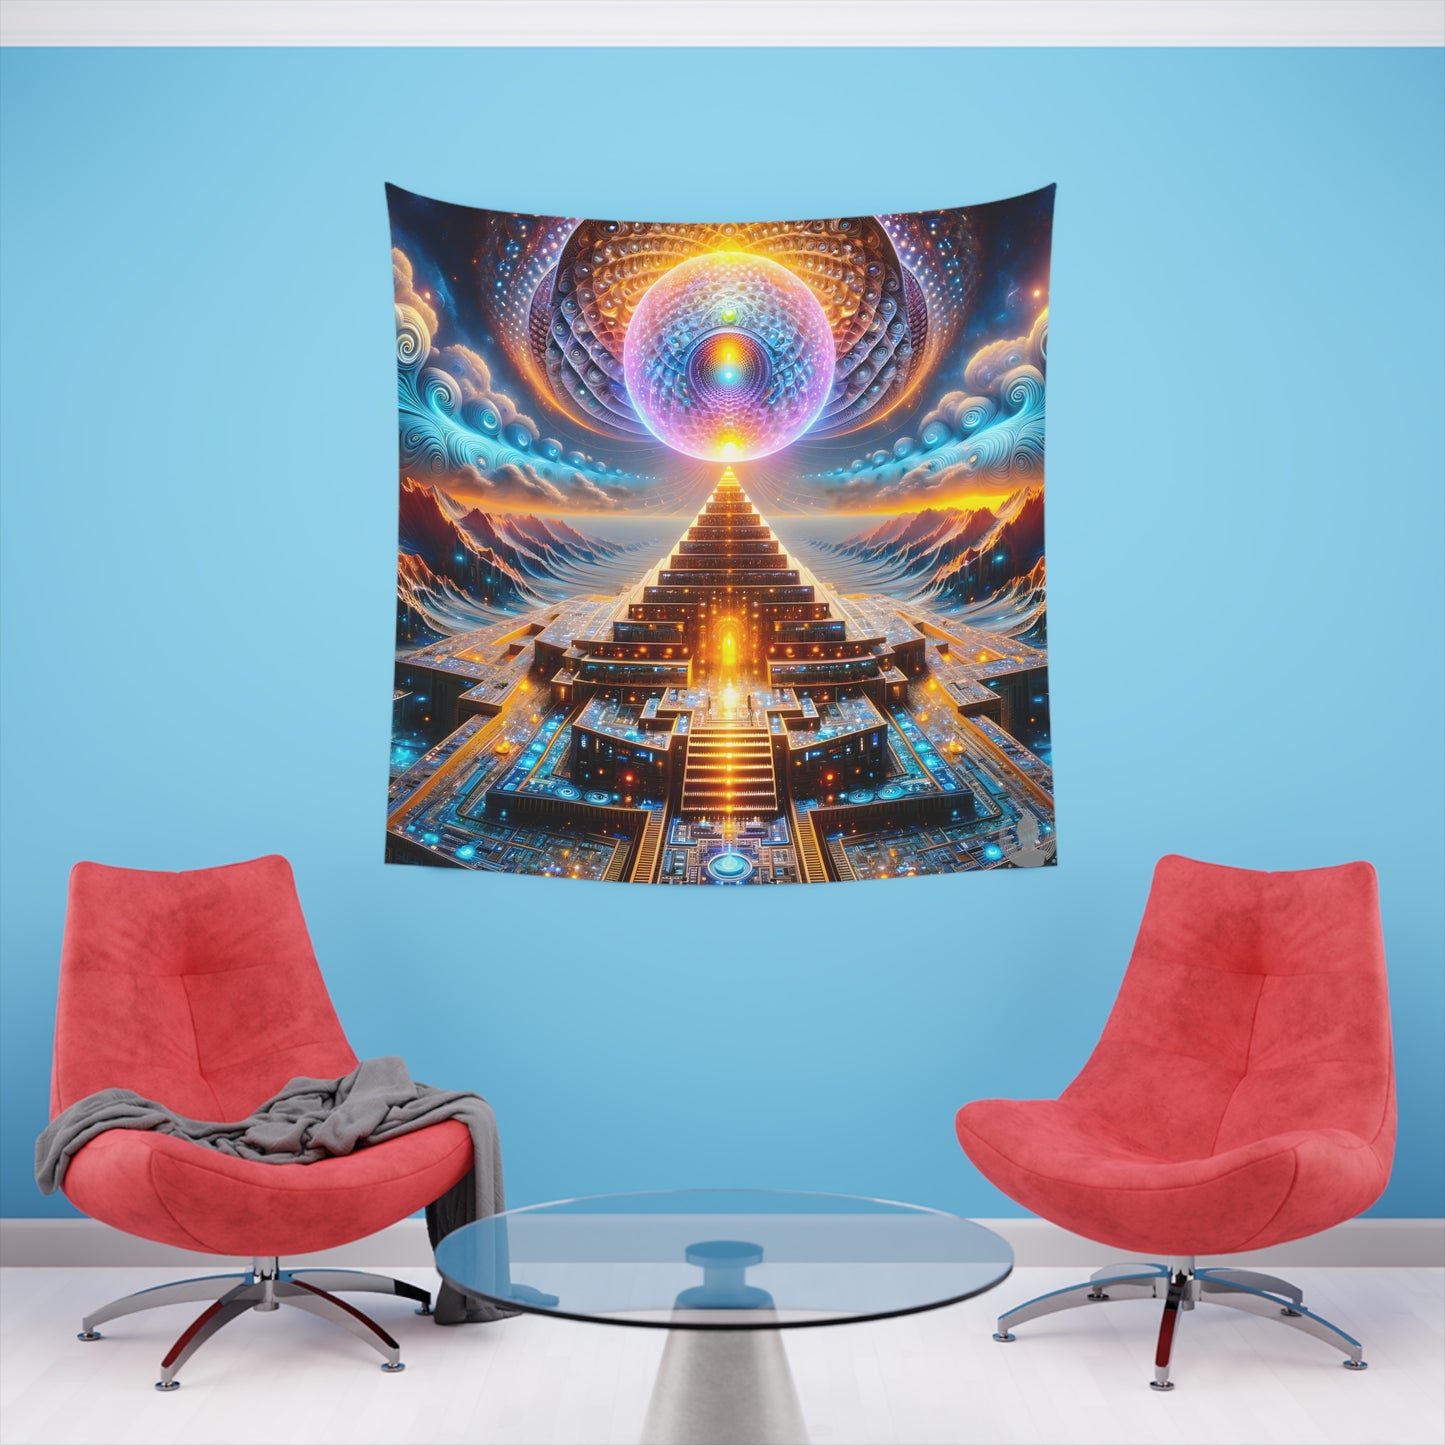 Recursive Technology by Meta Zen - Printed Wall Tapestry 57"x57" - Visionary Psychedelic Art Gift